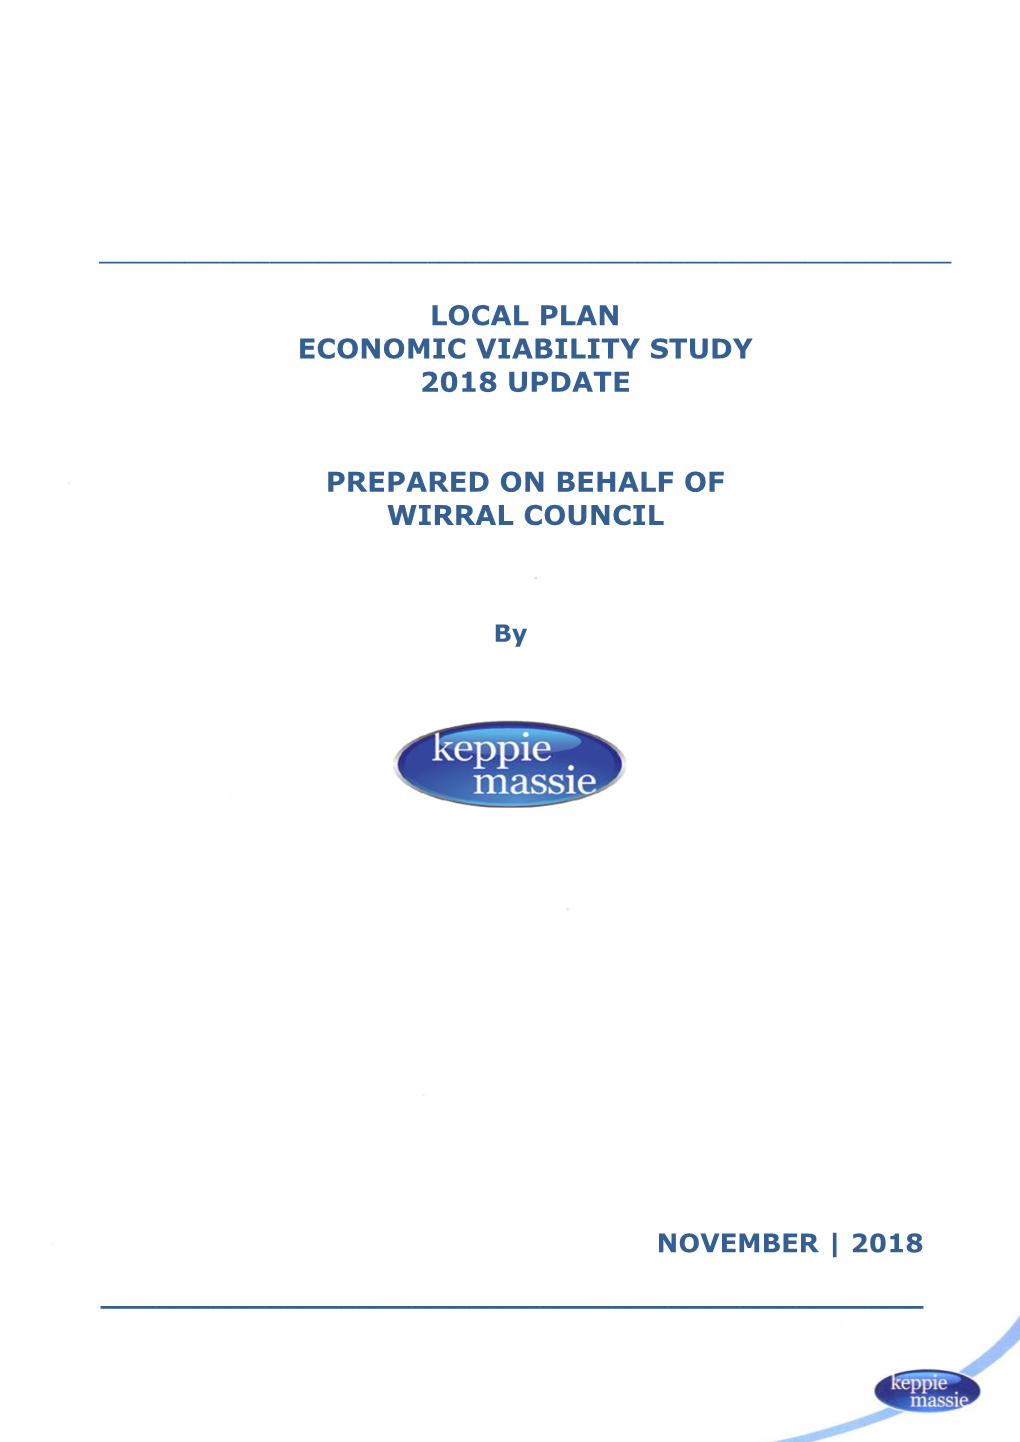 Local Plan Economic Viability Study 2018 Update Prepared on Behalf of Wirral Council